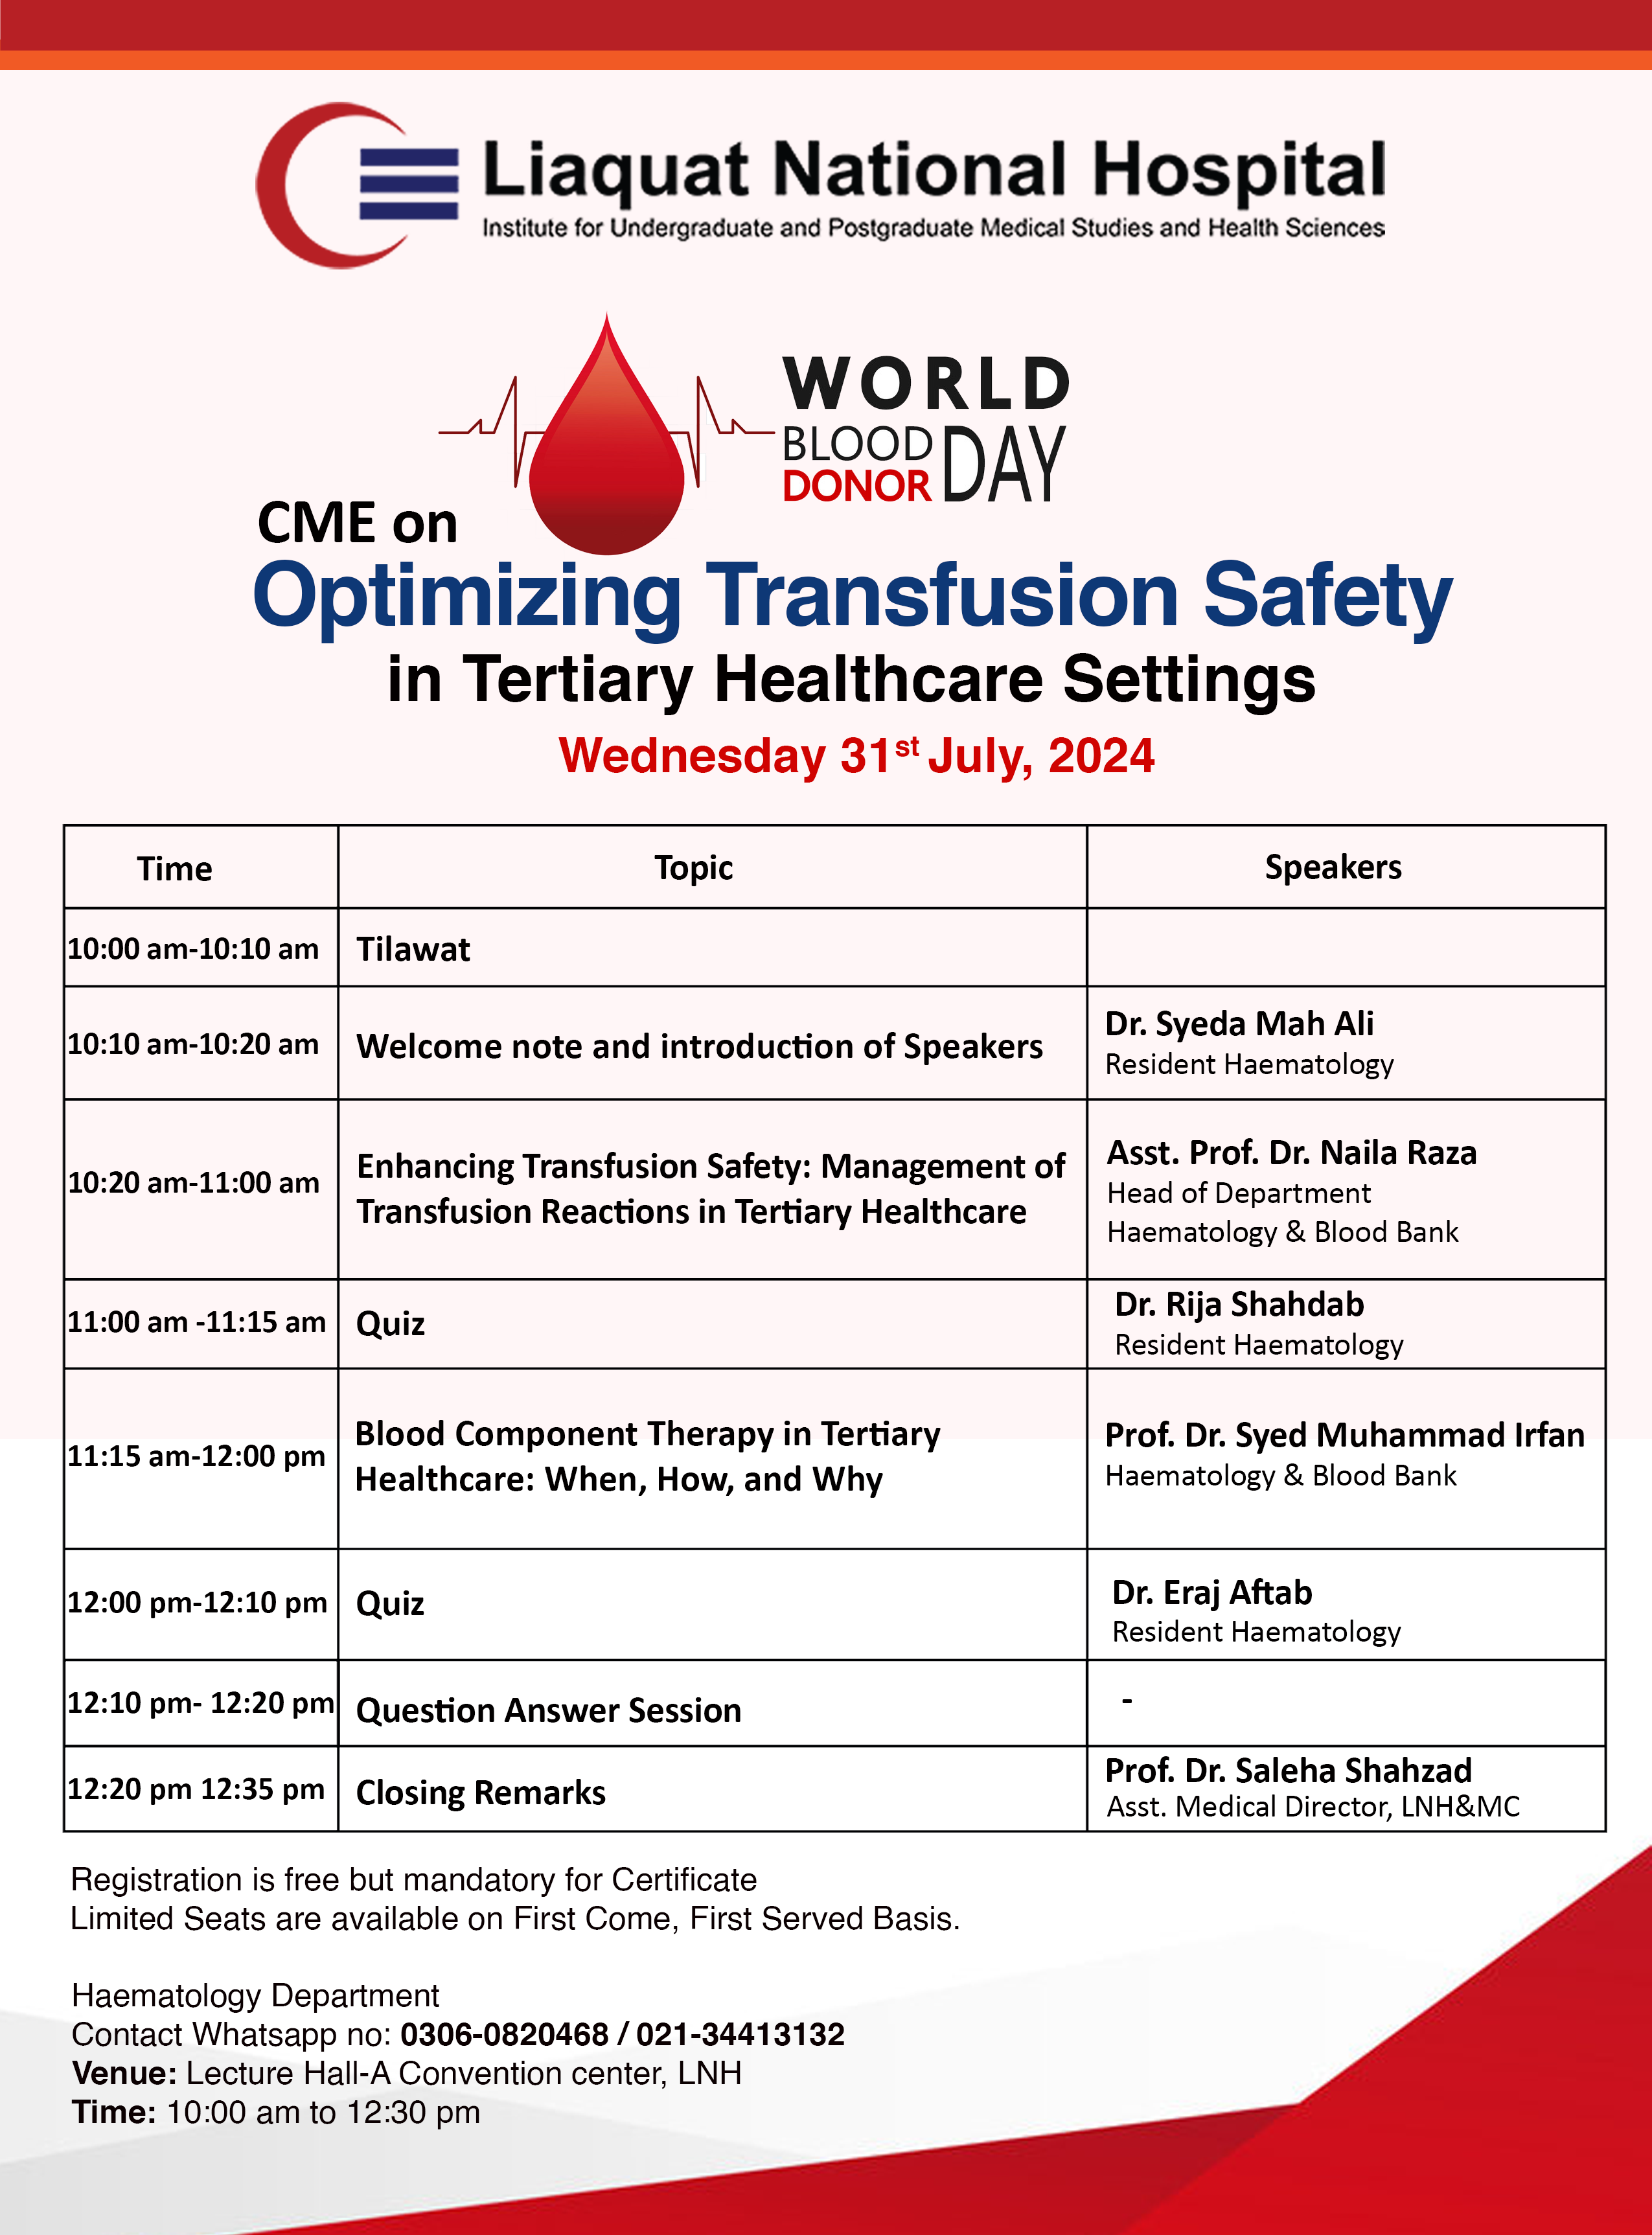 CME on Optimizing Transfusion Safety in Tertiary Healthcare Settings